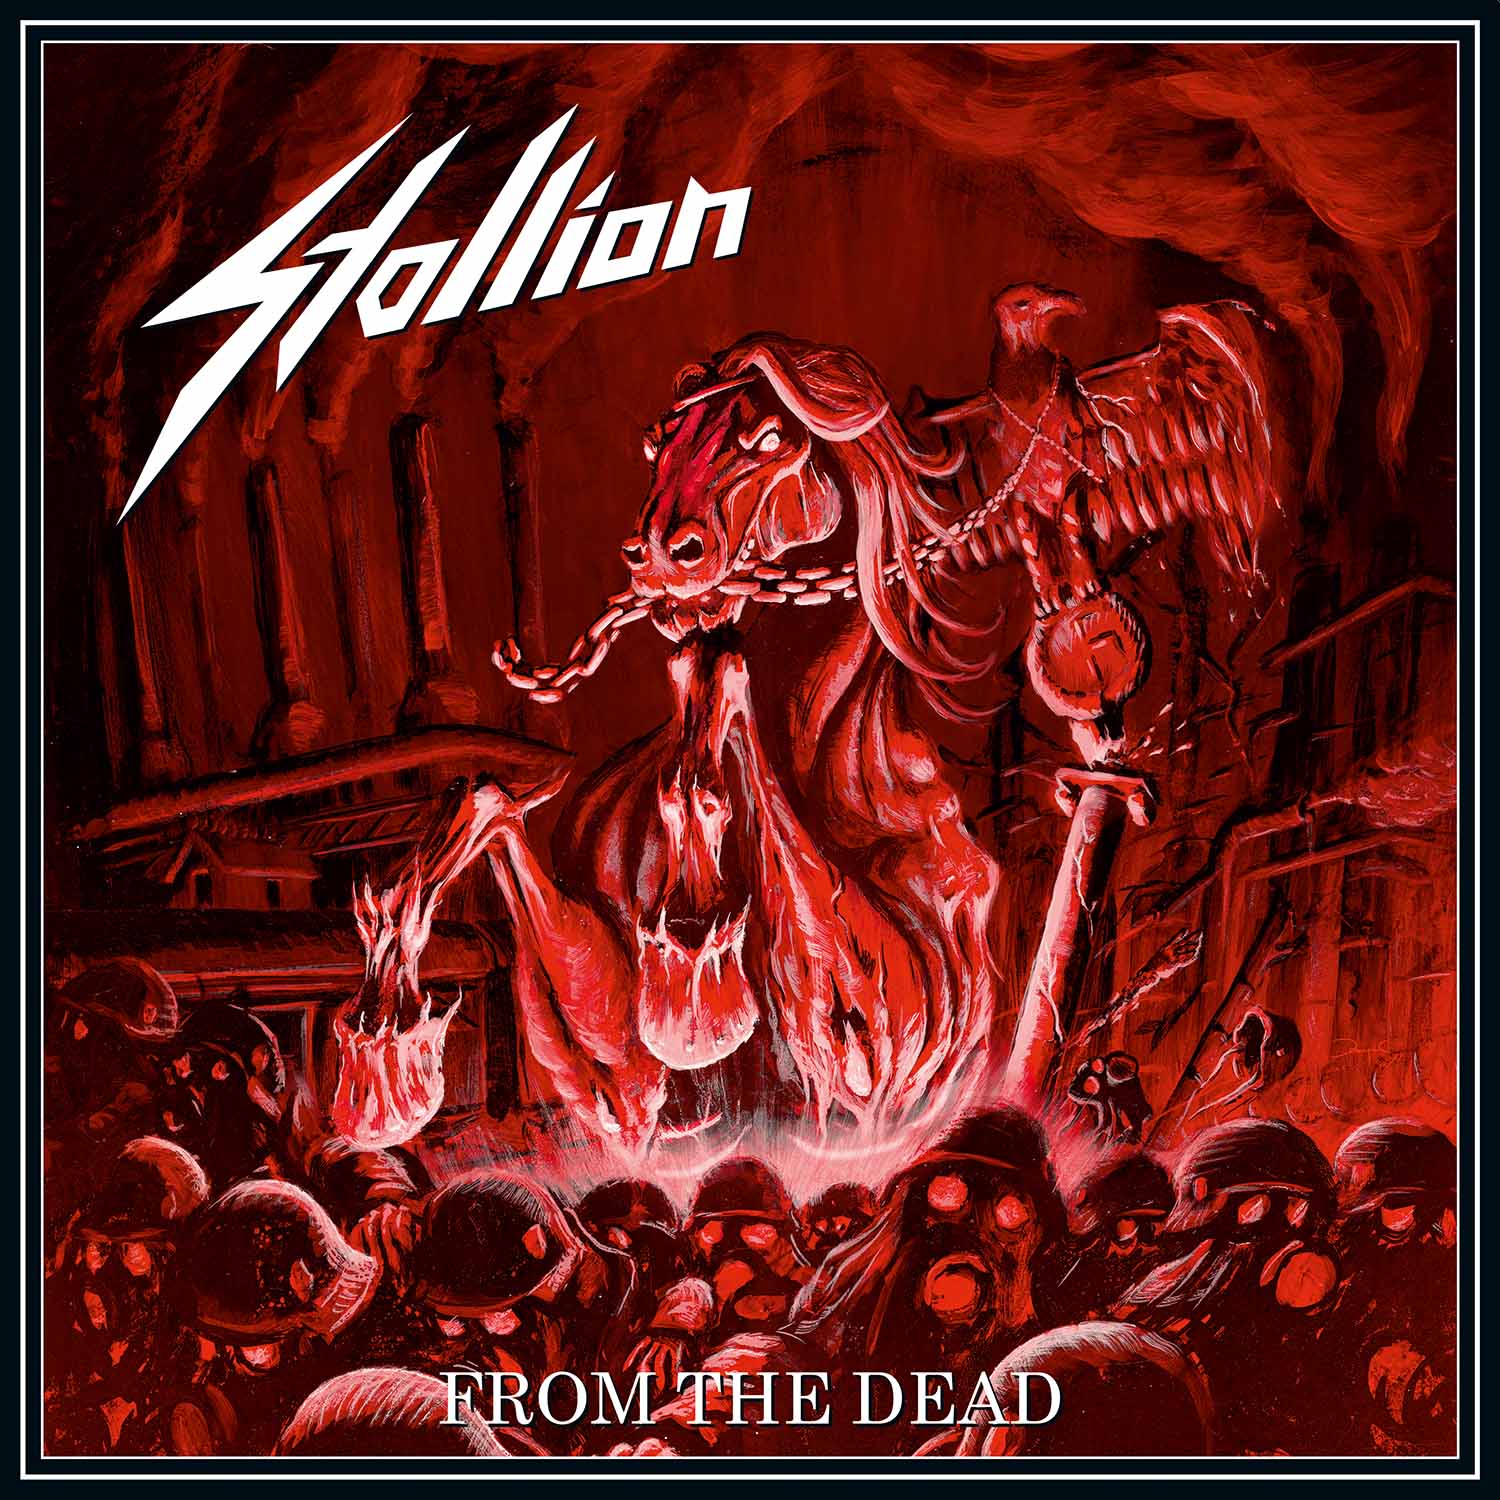 Stallion – From The Dead